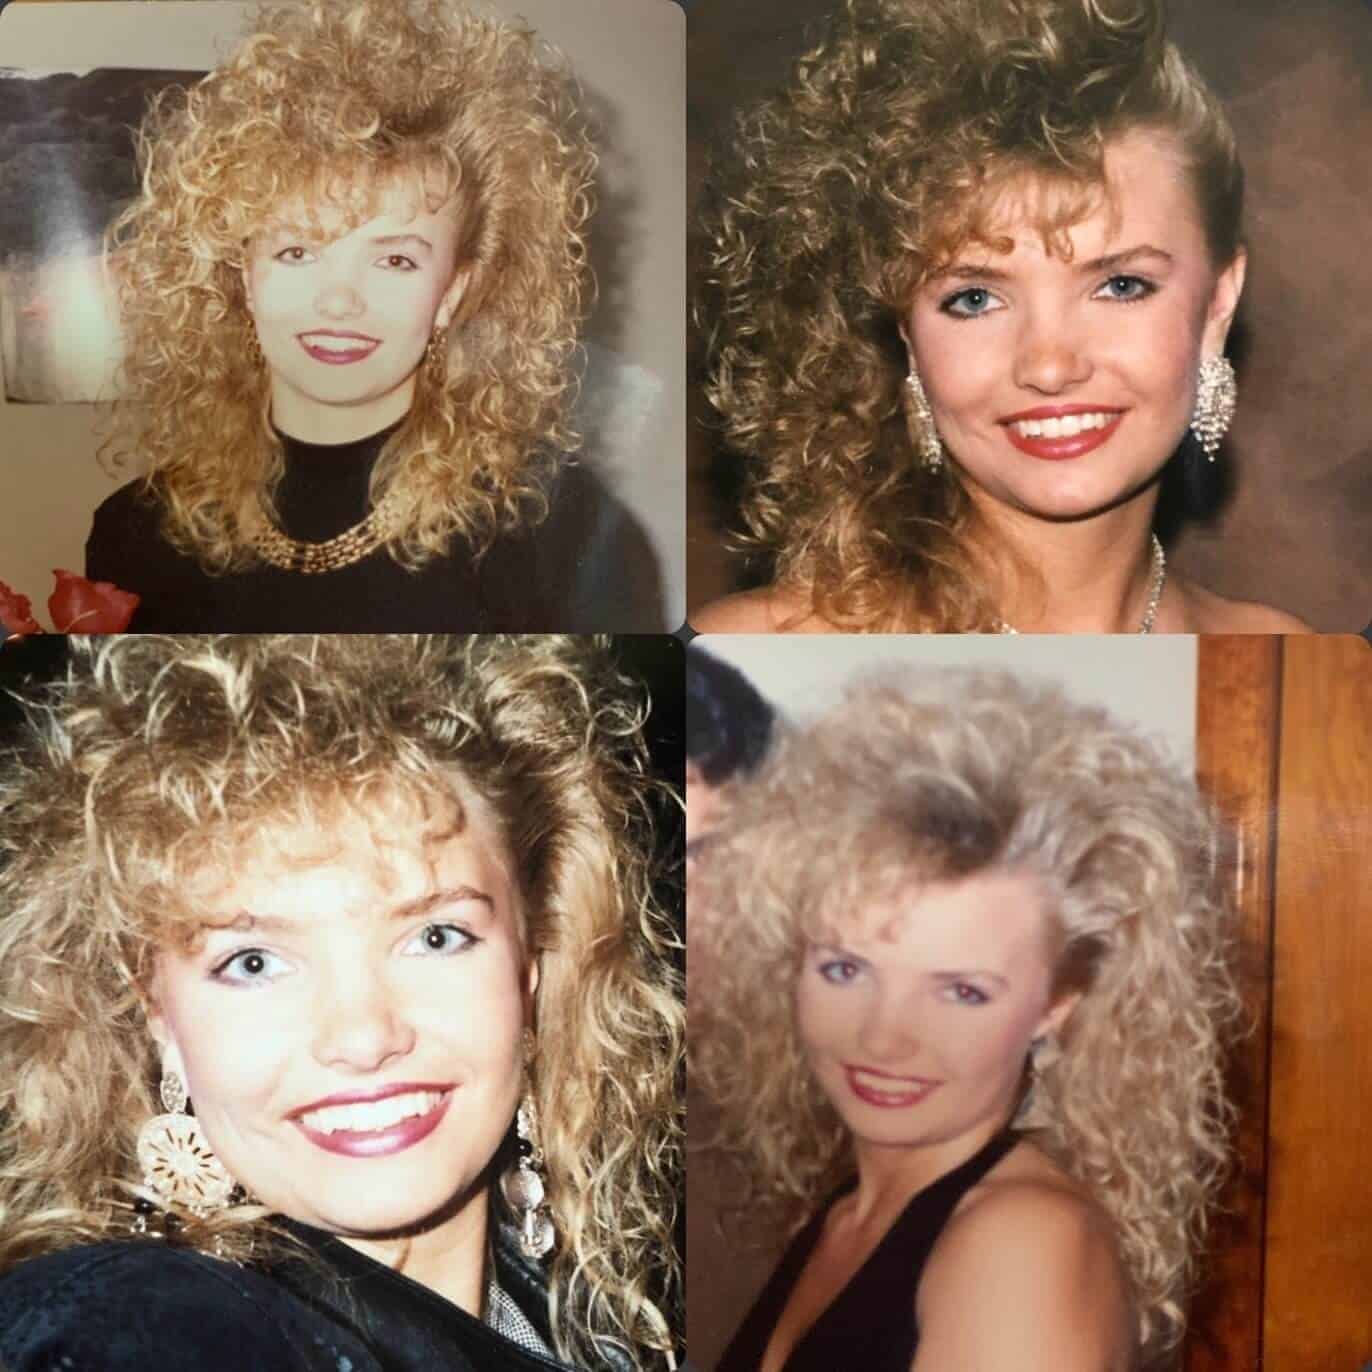 80s Hair Trends Like The Shag Are Back in a Big Way for 2023